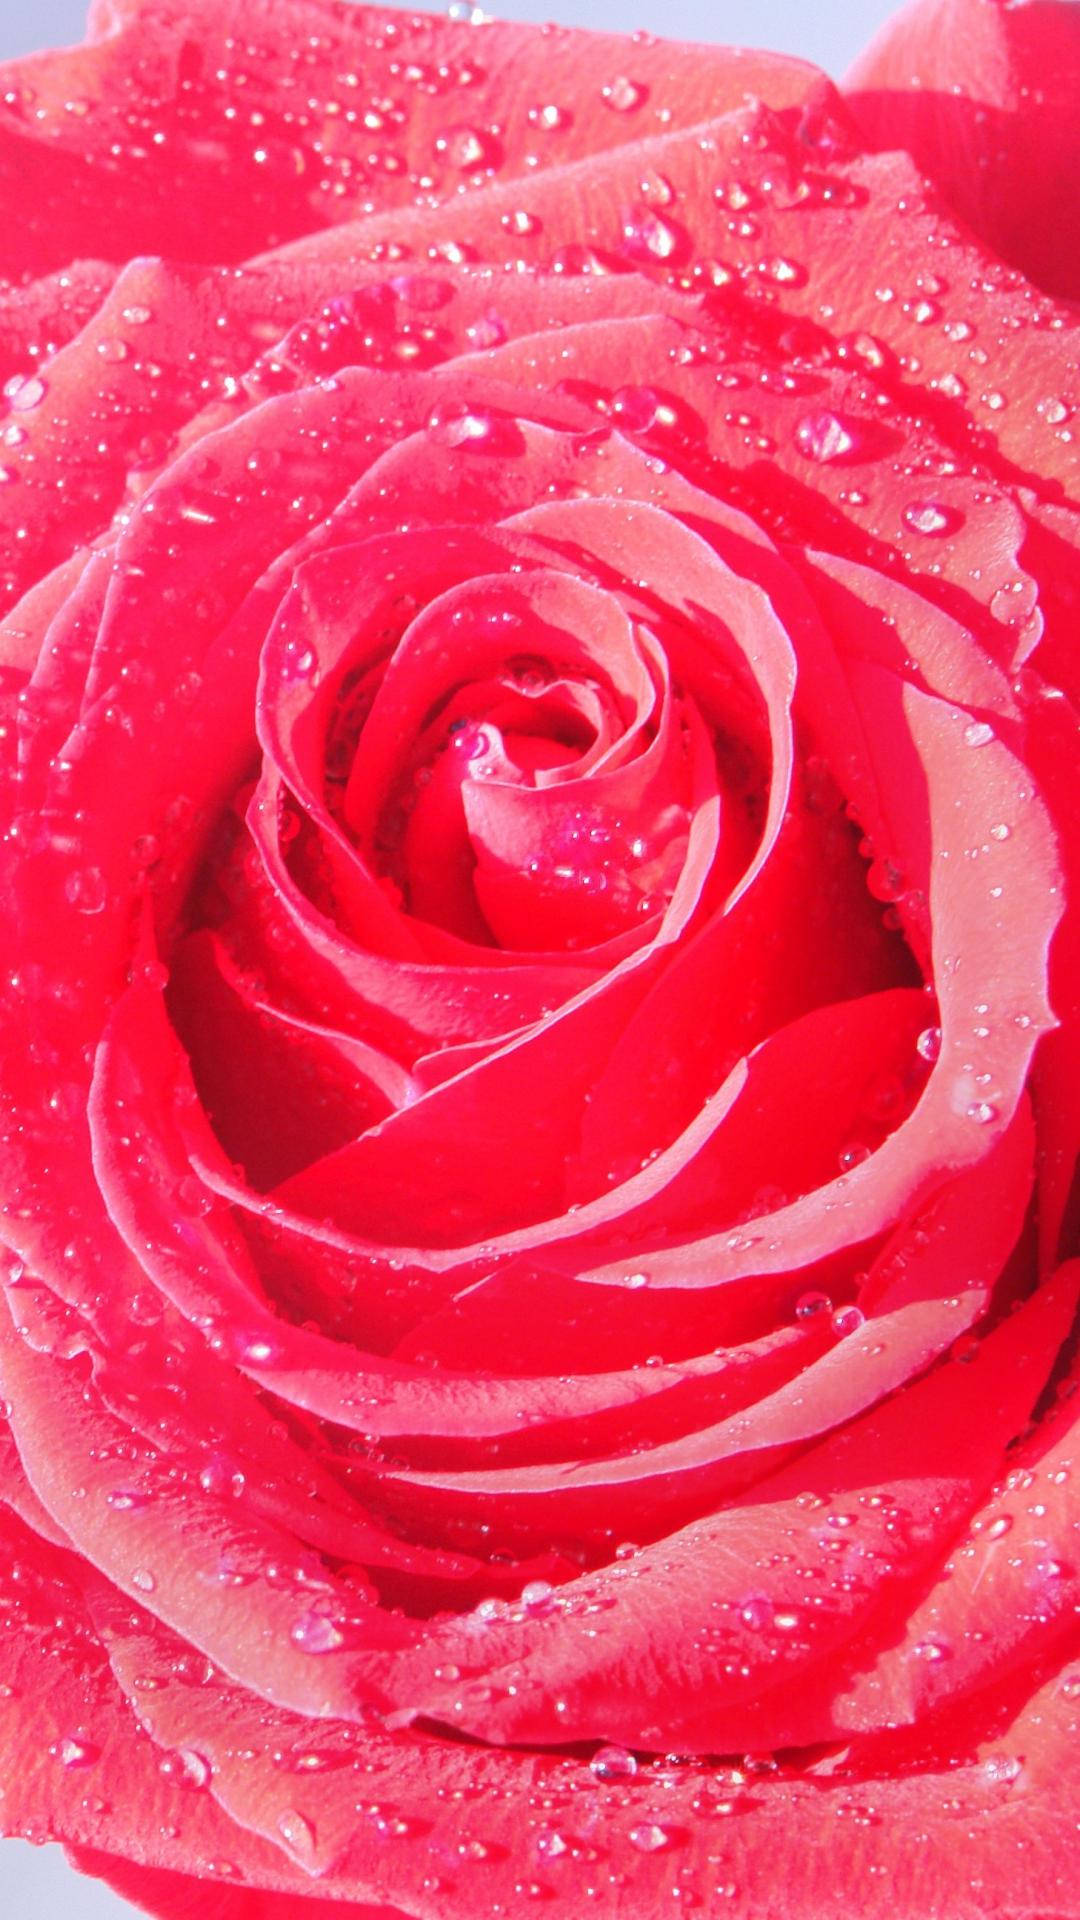 A stunning macro shot of a pink rose bloomed to perfection on an iPhone. Wallpaper